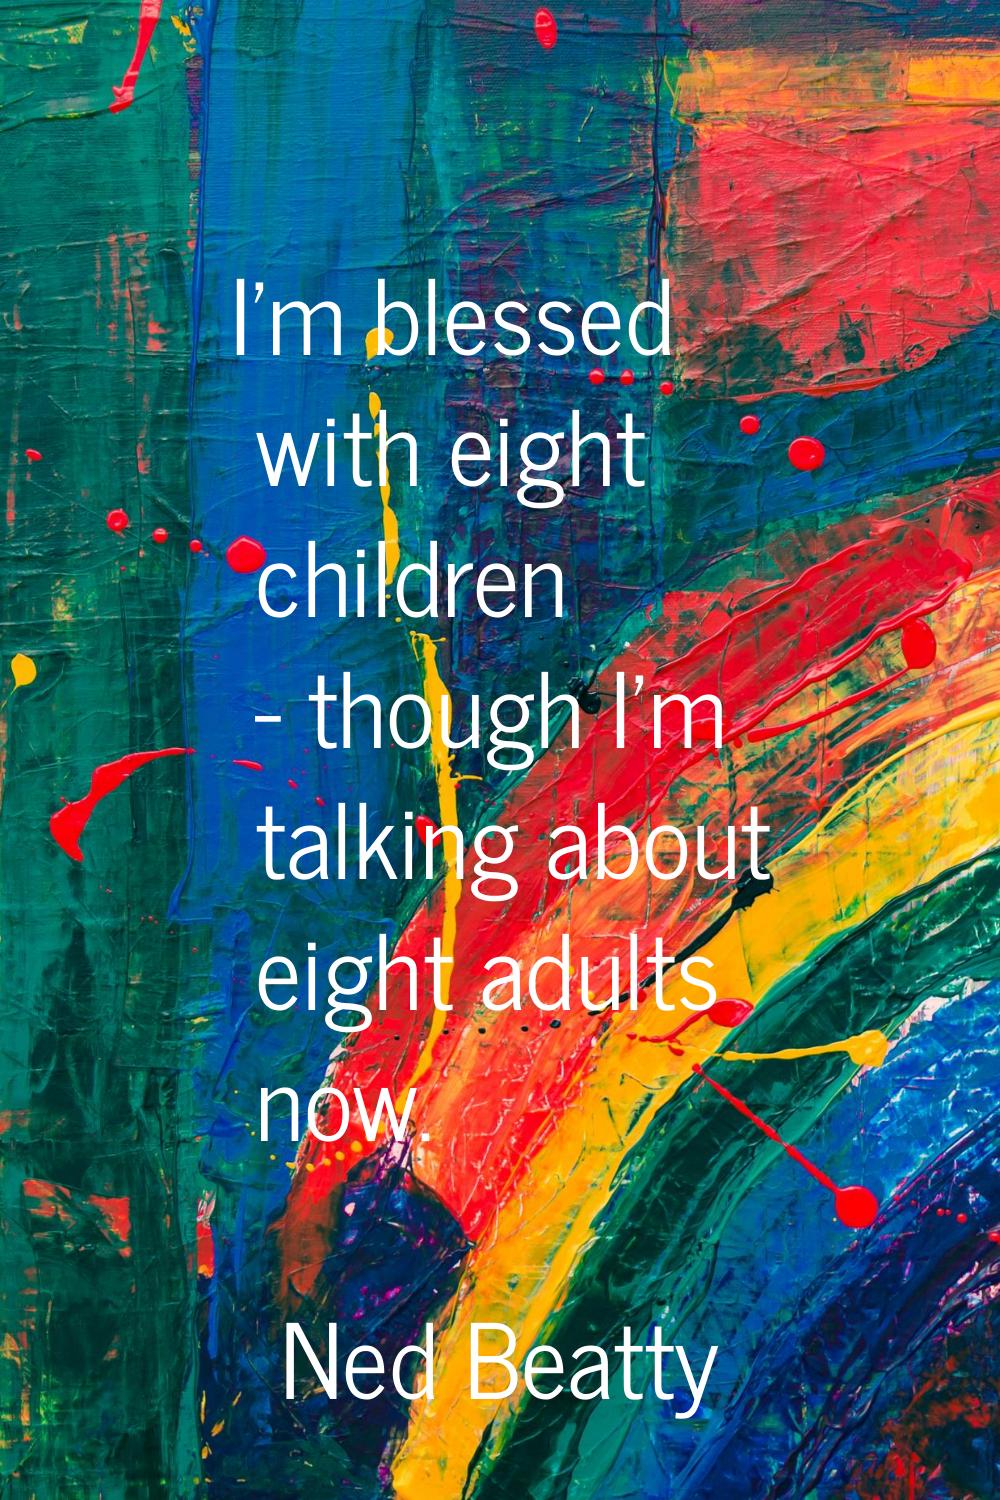 I'm blessed with eight children - though I'm talking about eight adults now.